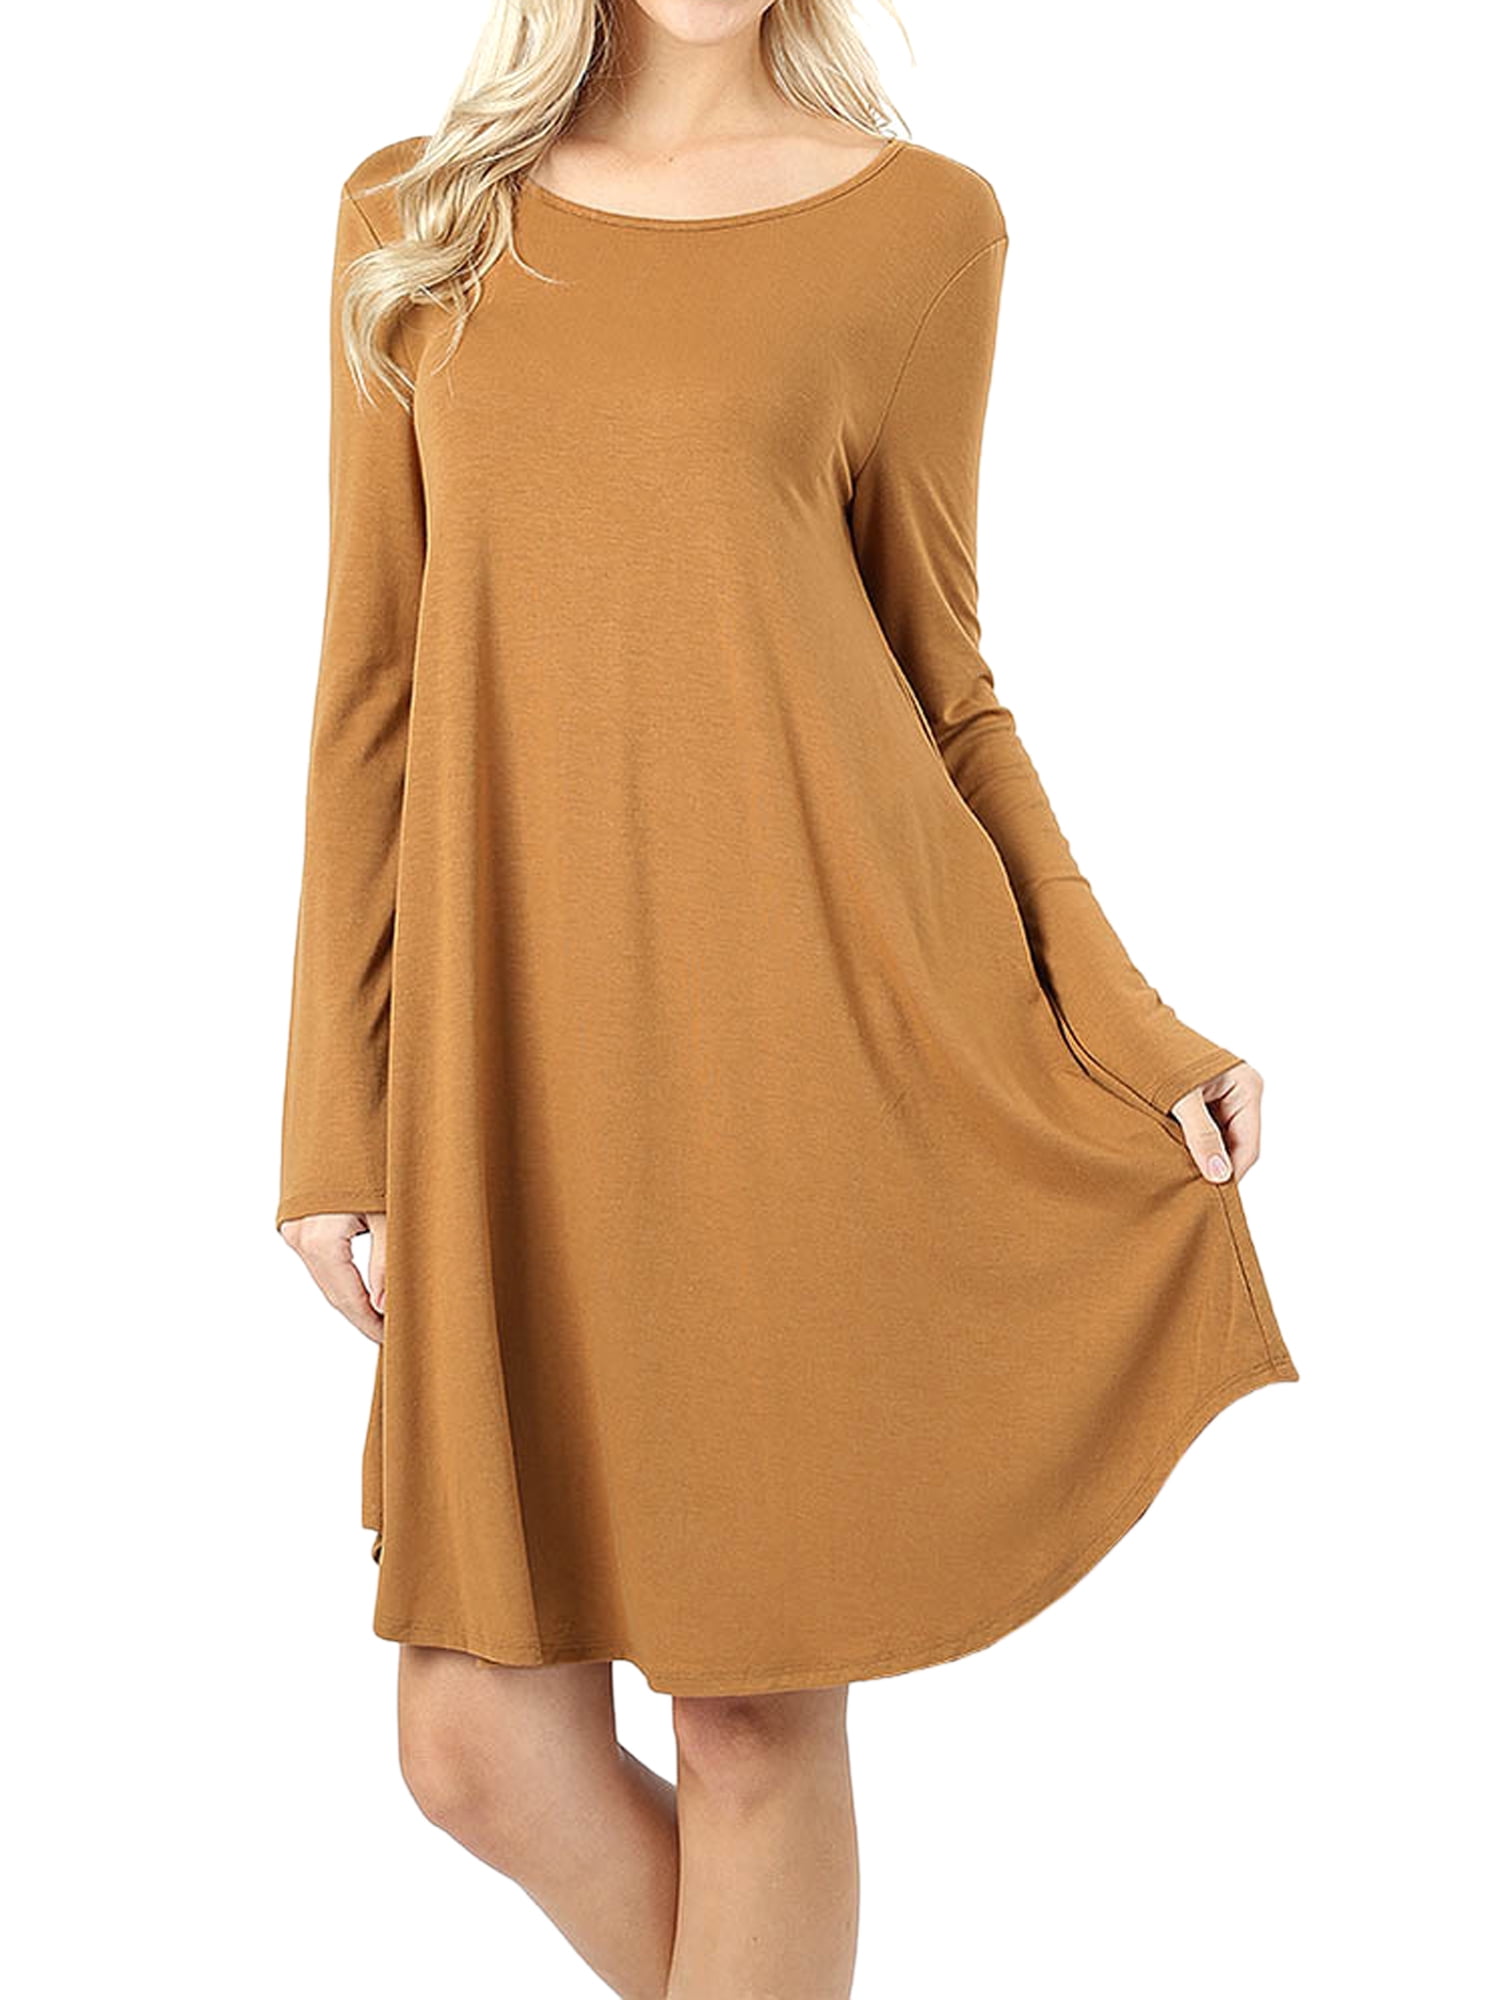 Chellysun Womens Dresses Long Sleeve A Line Solid Pleated Casual Fall Dress with Pockets